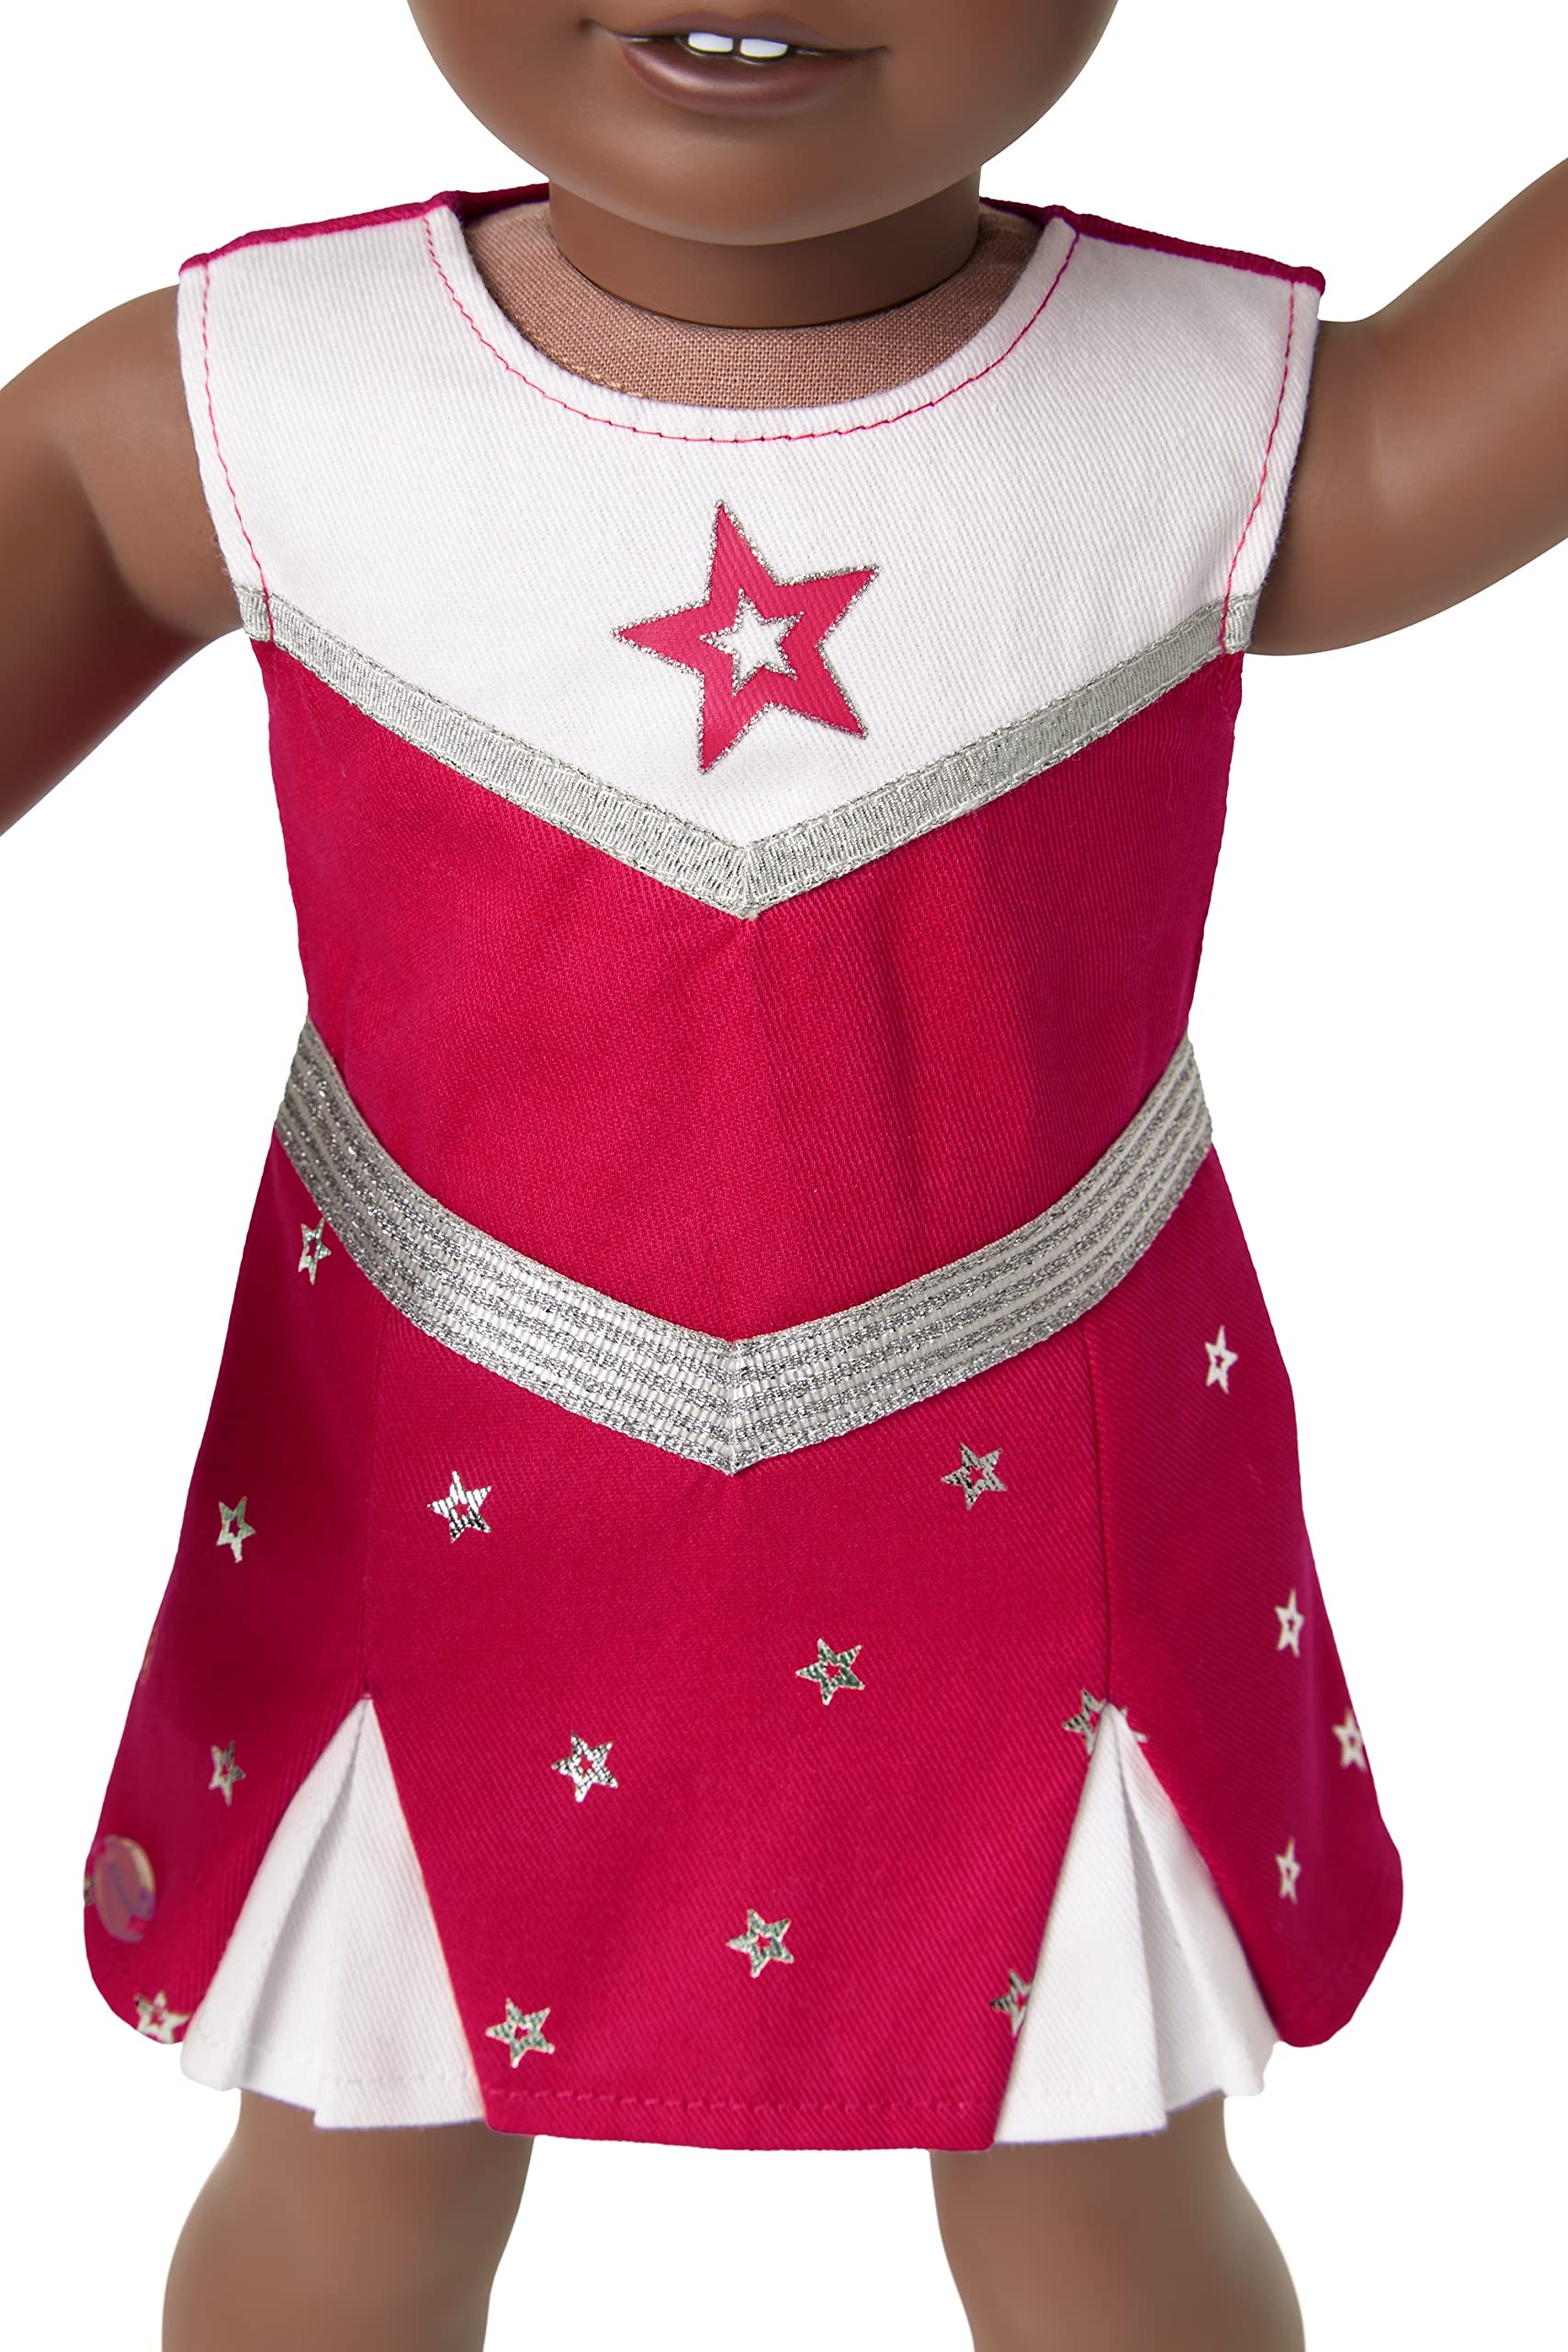 American Girl Truly Me Rah-Rad Red Cheerleading Outfit for 18-inch Dolls